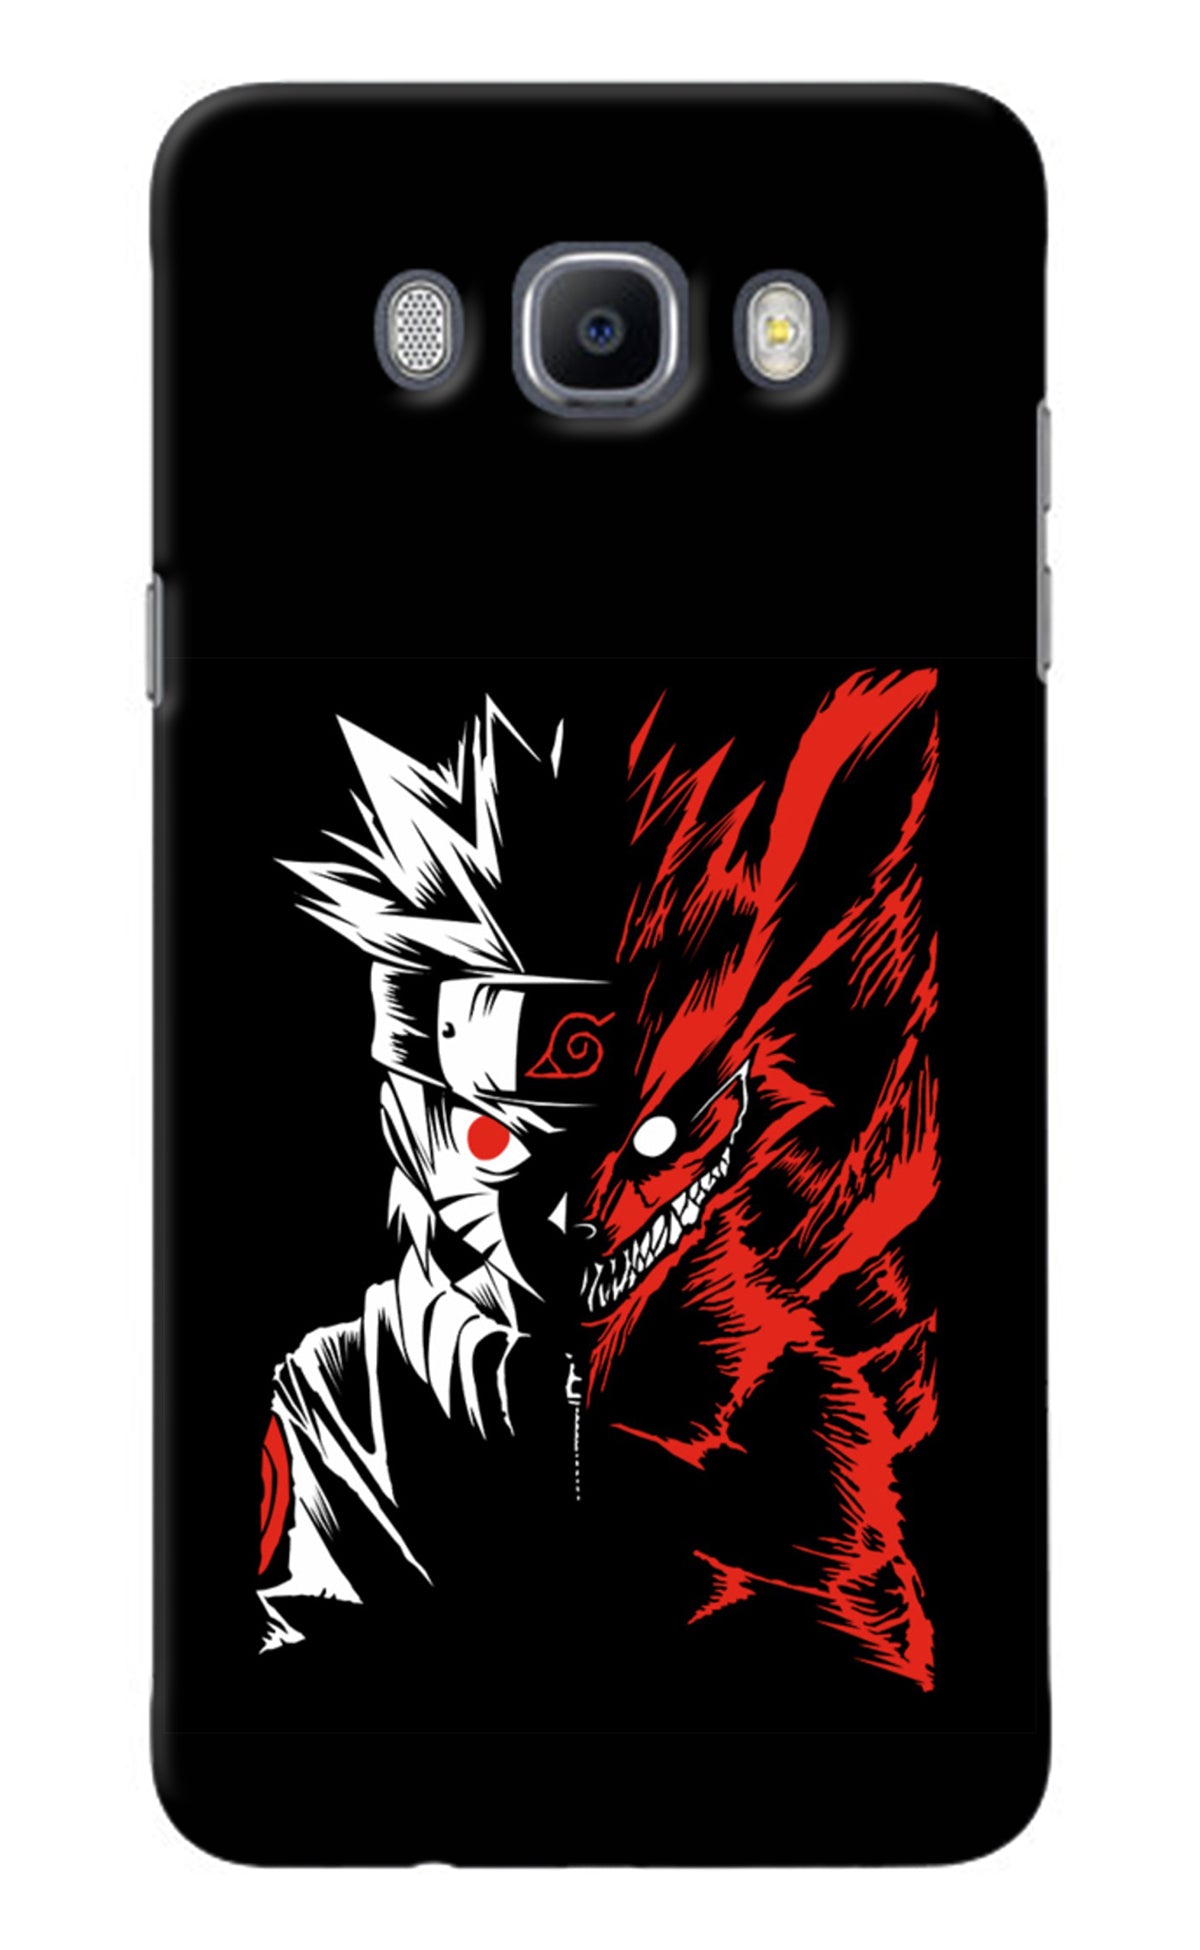 Naruto Two Face Samsung J7 2016 Back Cover